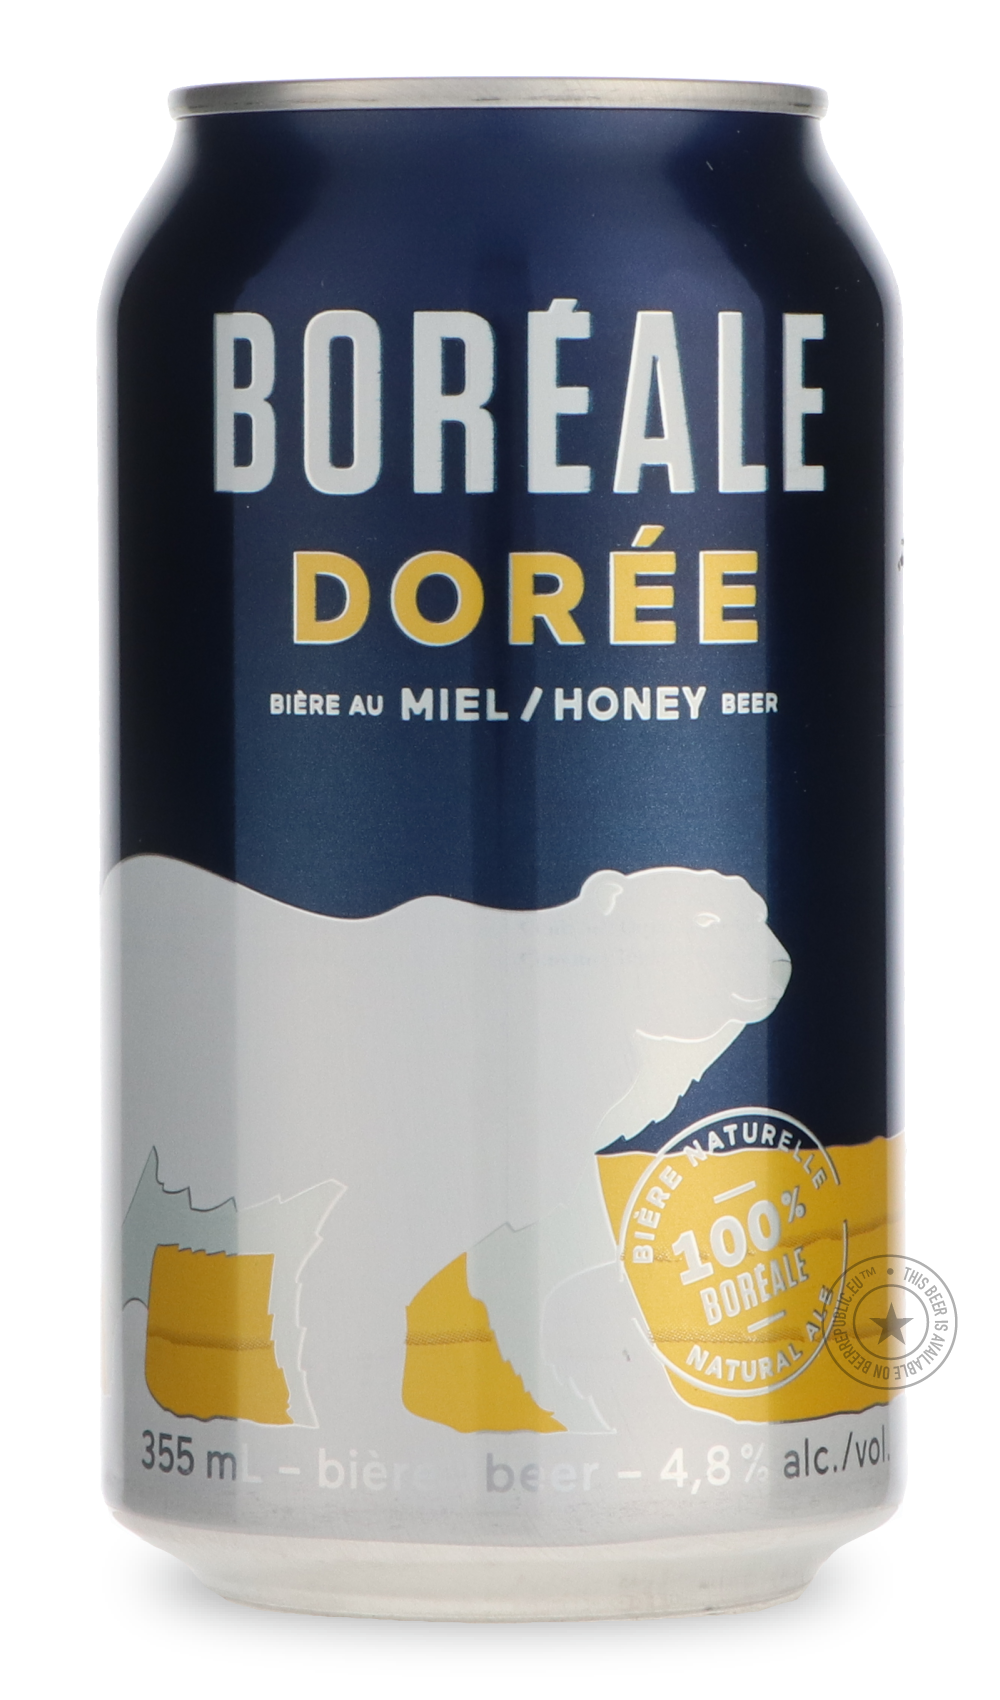 -Boréale- Dorée-Pale- Only @ Beer Republic - The best online beer store for American & Canadian craft beer - Buy beer online from the USA and Canada - Bier online kopen - Amerikaans bier kopen - Craft beer store - Craft beer kopen - Amerikanisch bier kaufen - Bier online kaufen - Acheter biere online - IPA - Stout - Porter - New England IPA - Hazy IPA - Imperial Stout - Barrel Aged - Barrel Aged Imperial Stout - Brown - Dark beer - Blond - Blonde - Pilsner - Lager - Wheat - Weizen - Amber - Barley Wine - Qu